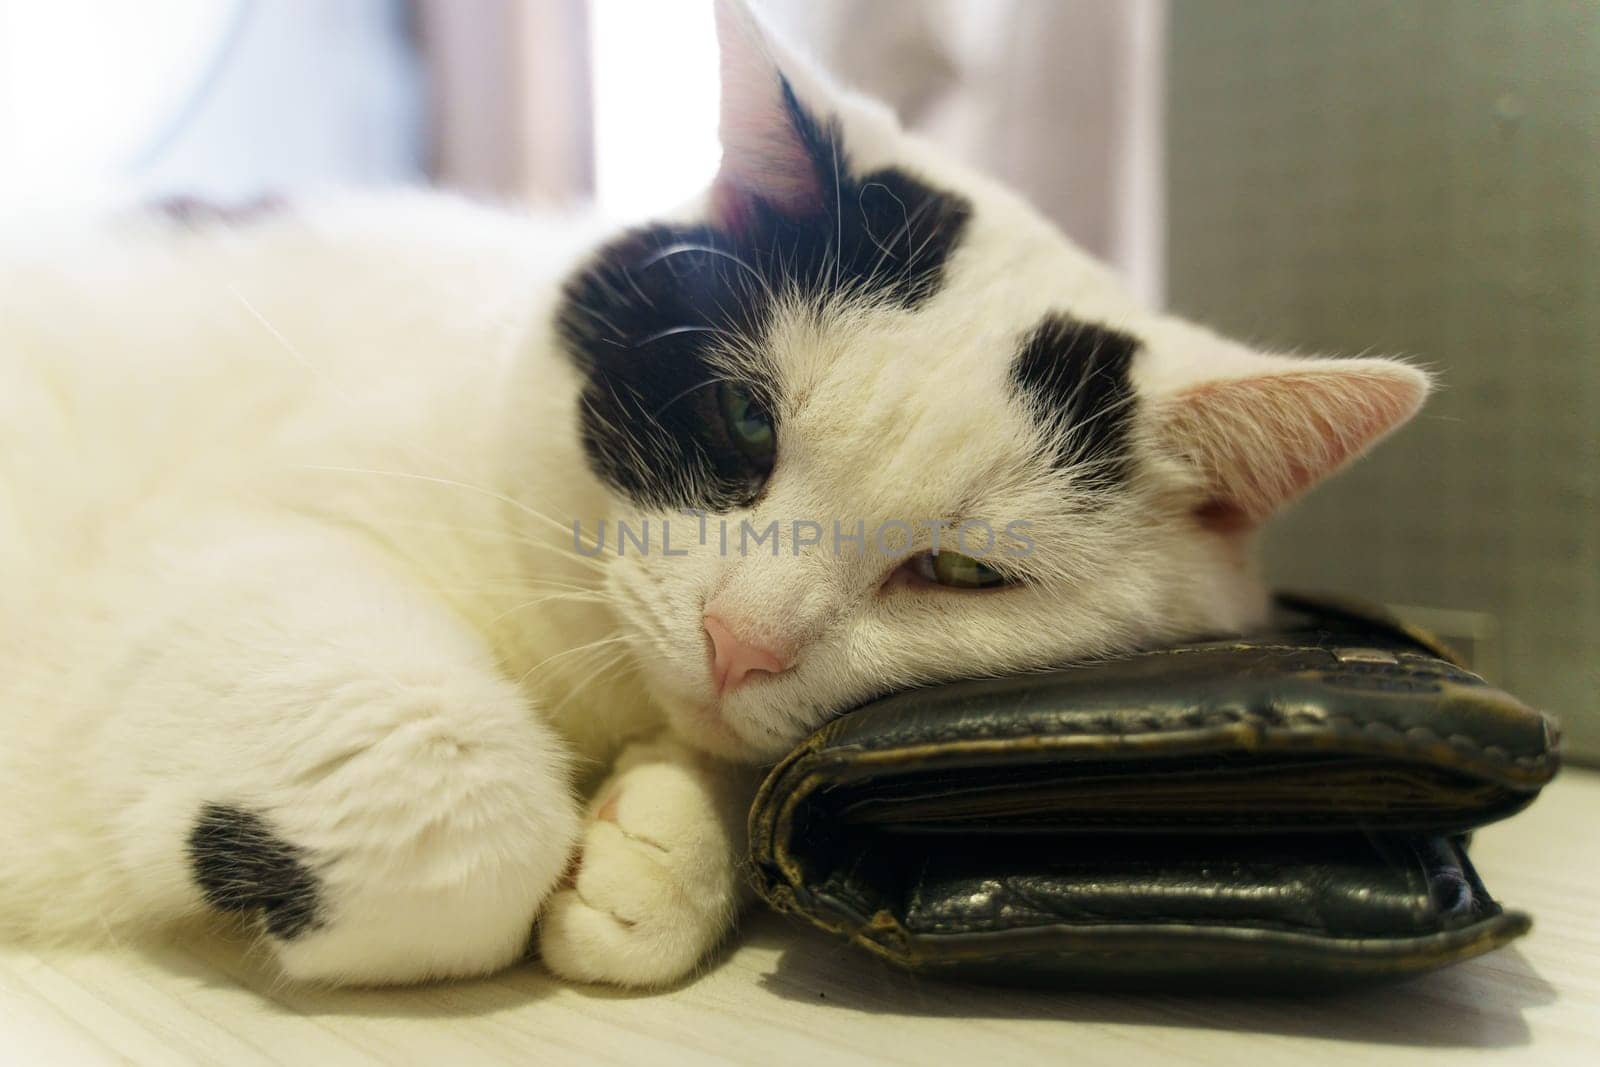 A black and white cat resting comfortably atop a purse, showcasing its elegant fur and relaxed posture.